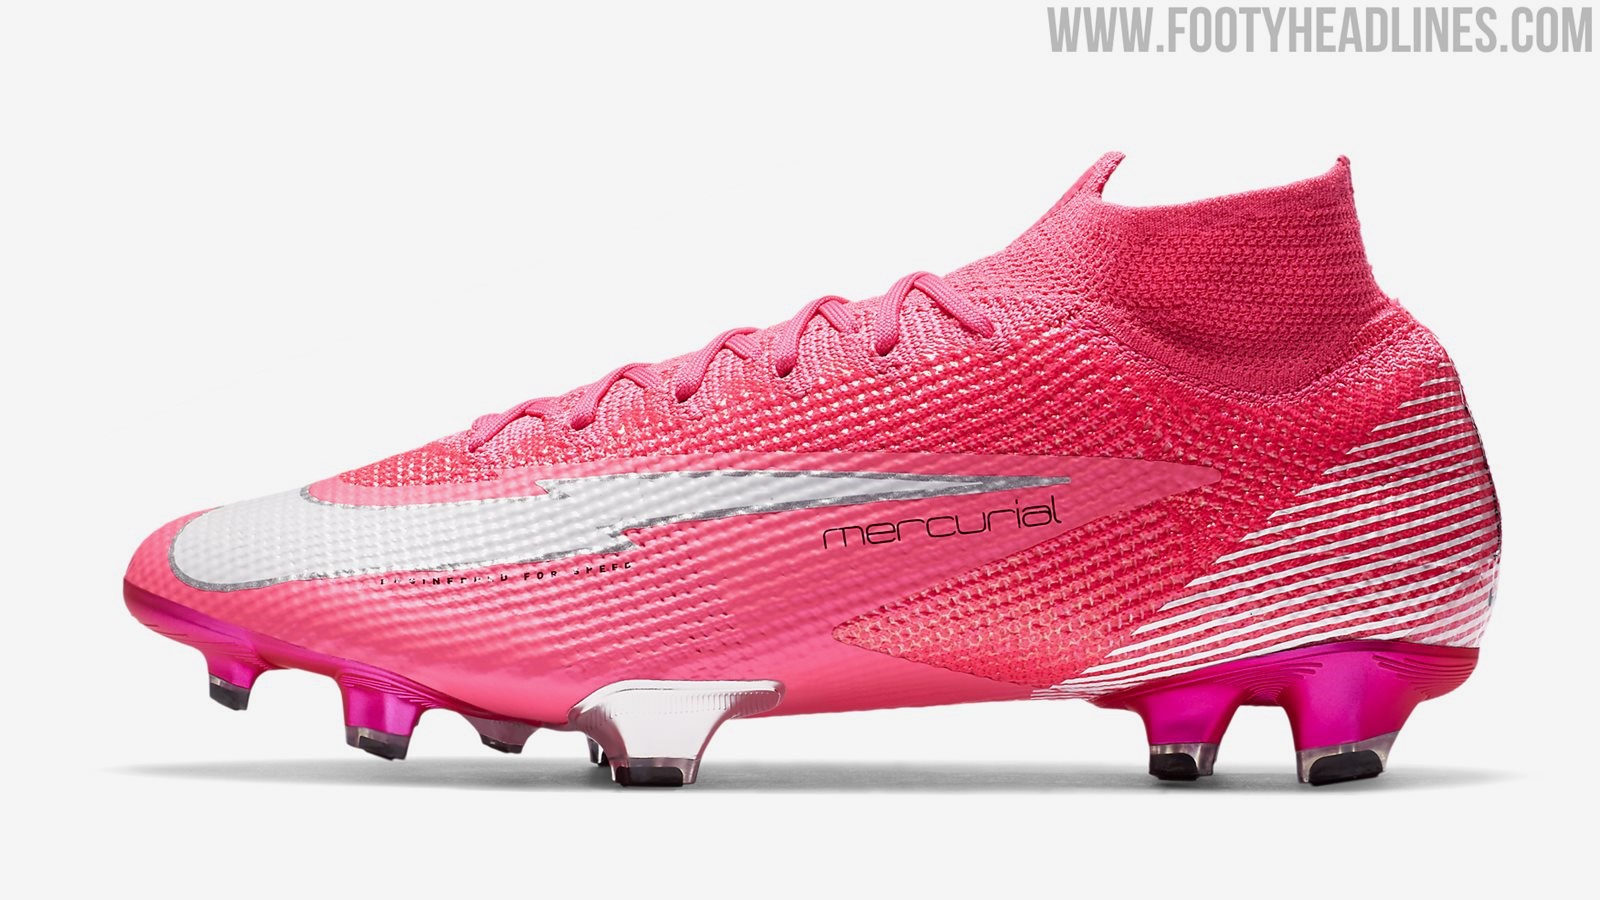 All Nike Mercurial Football Boots That Were Released in 2020 - Footy ...